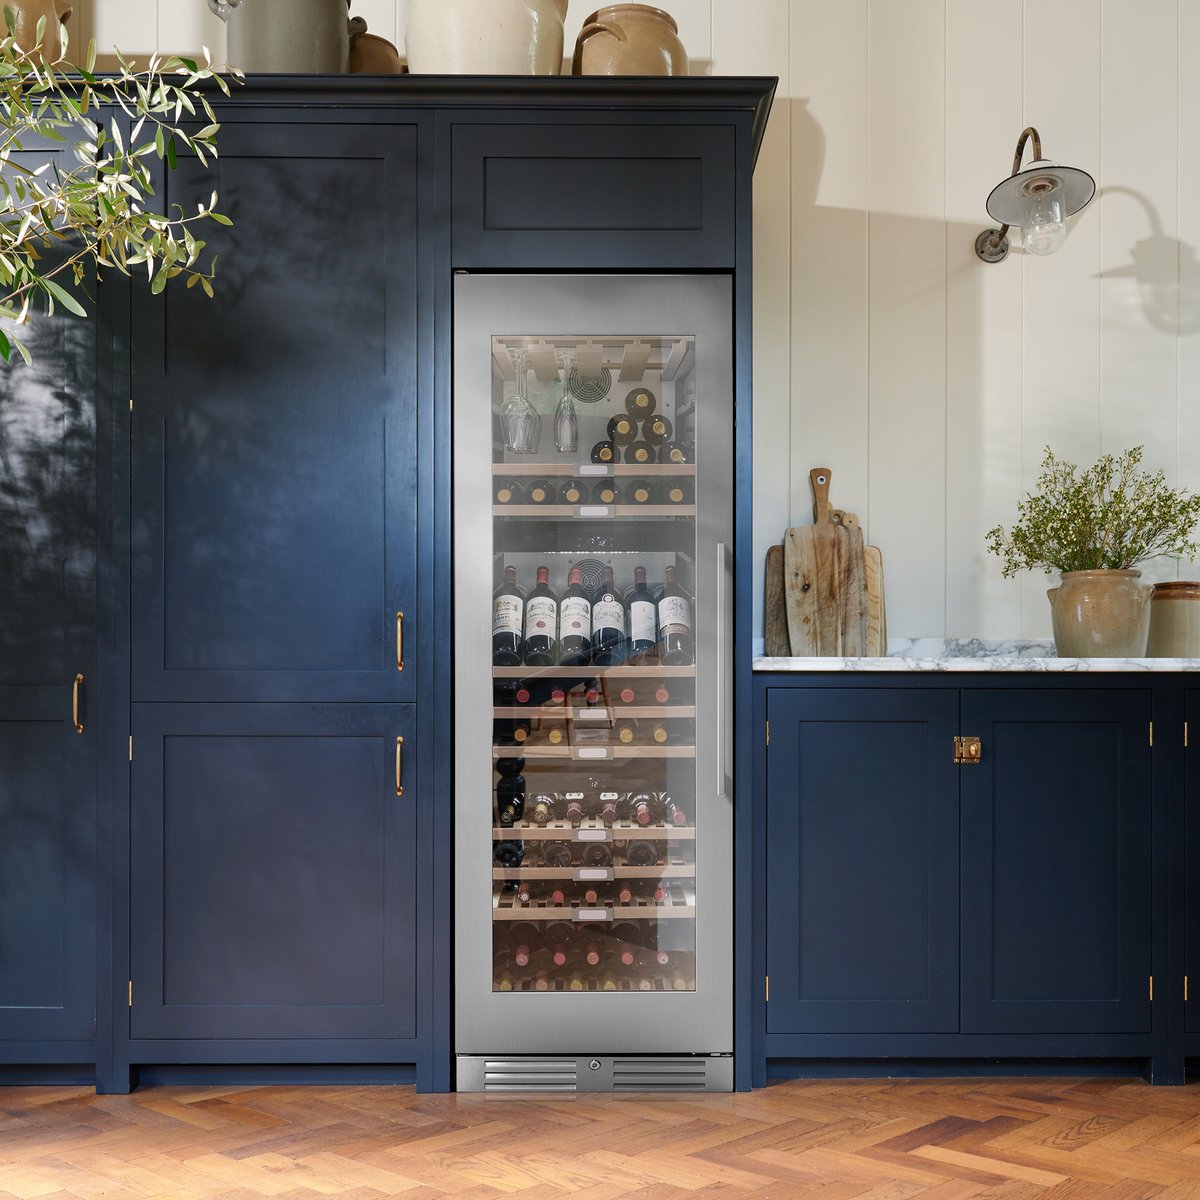 What are your #BankHolidayWeekend plans? You know where you'll find us... near the wine😏 Especially when we have storage for 111 Bordeaux style wine bottles in our WF1552 wine cabinet: buff.ly/3vu5Q2Q #CapleQuality